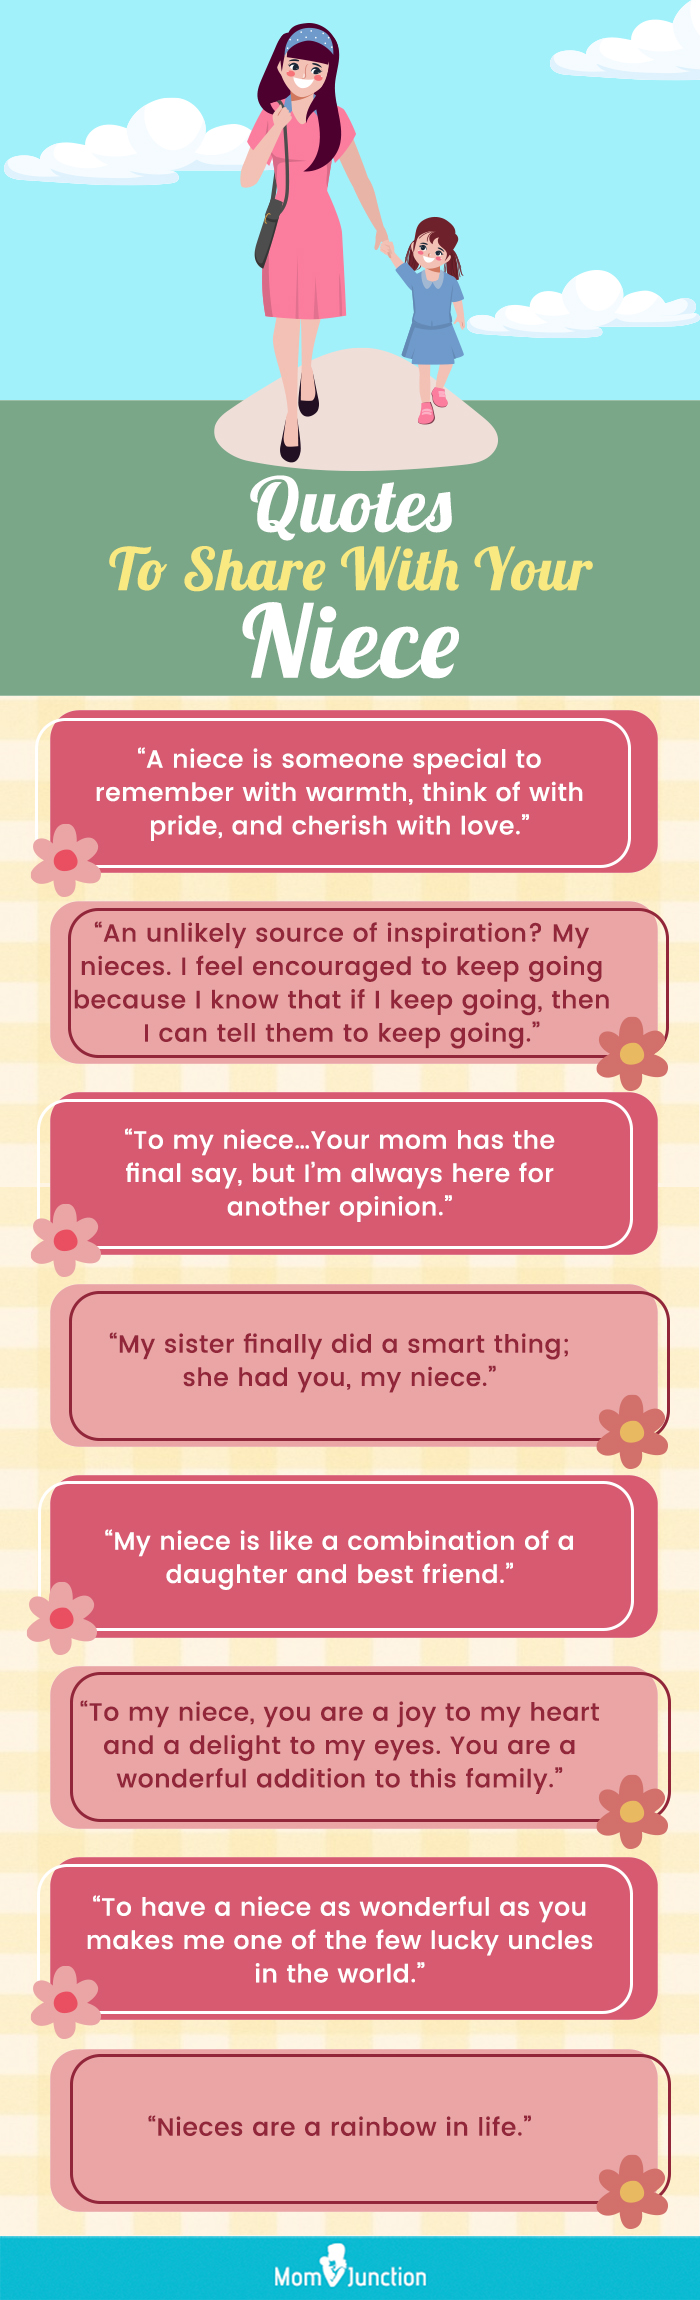 quotes to share with your niece (infographic)